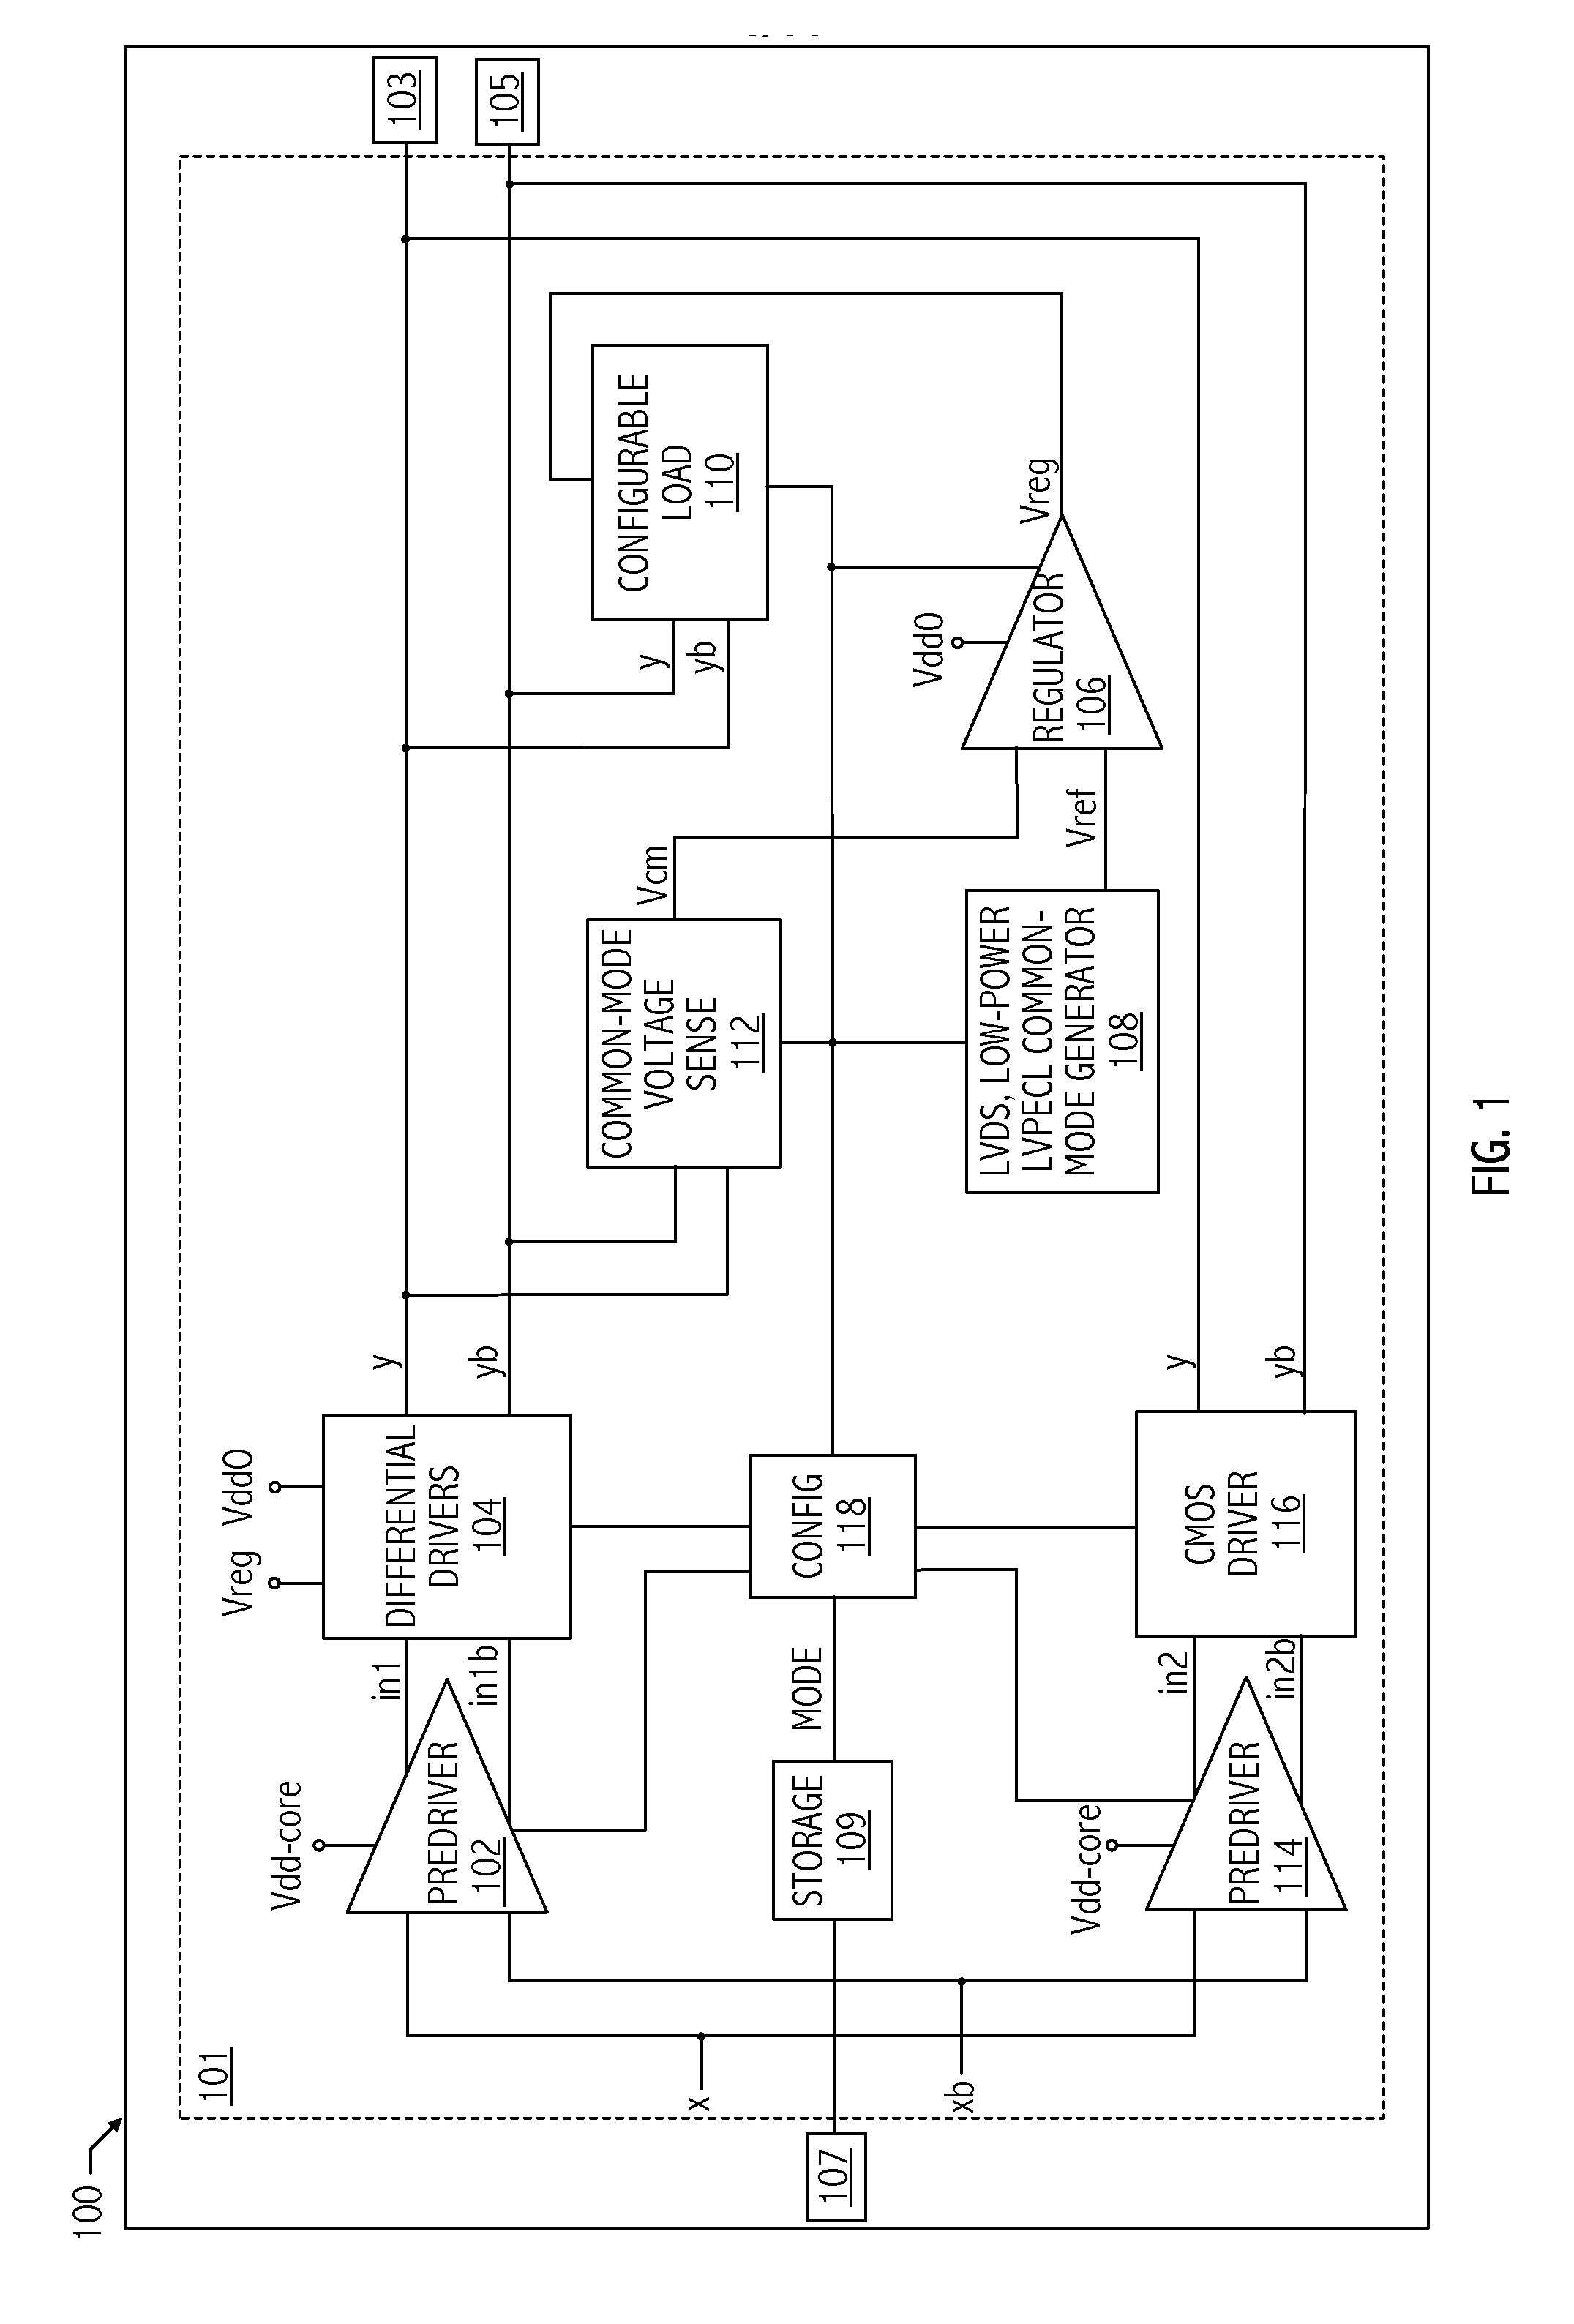 Multiple signal format output driver with configurable internal load